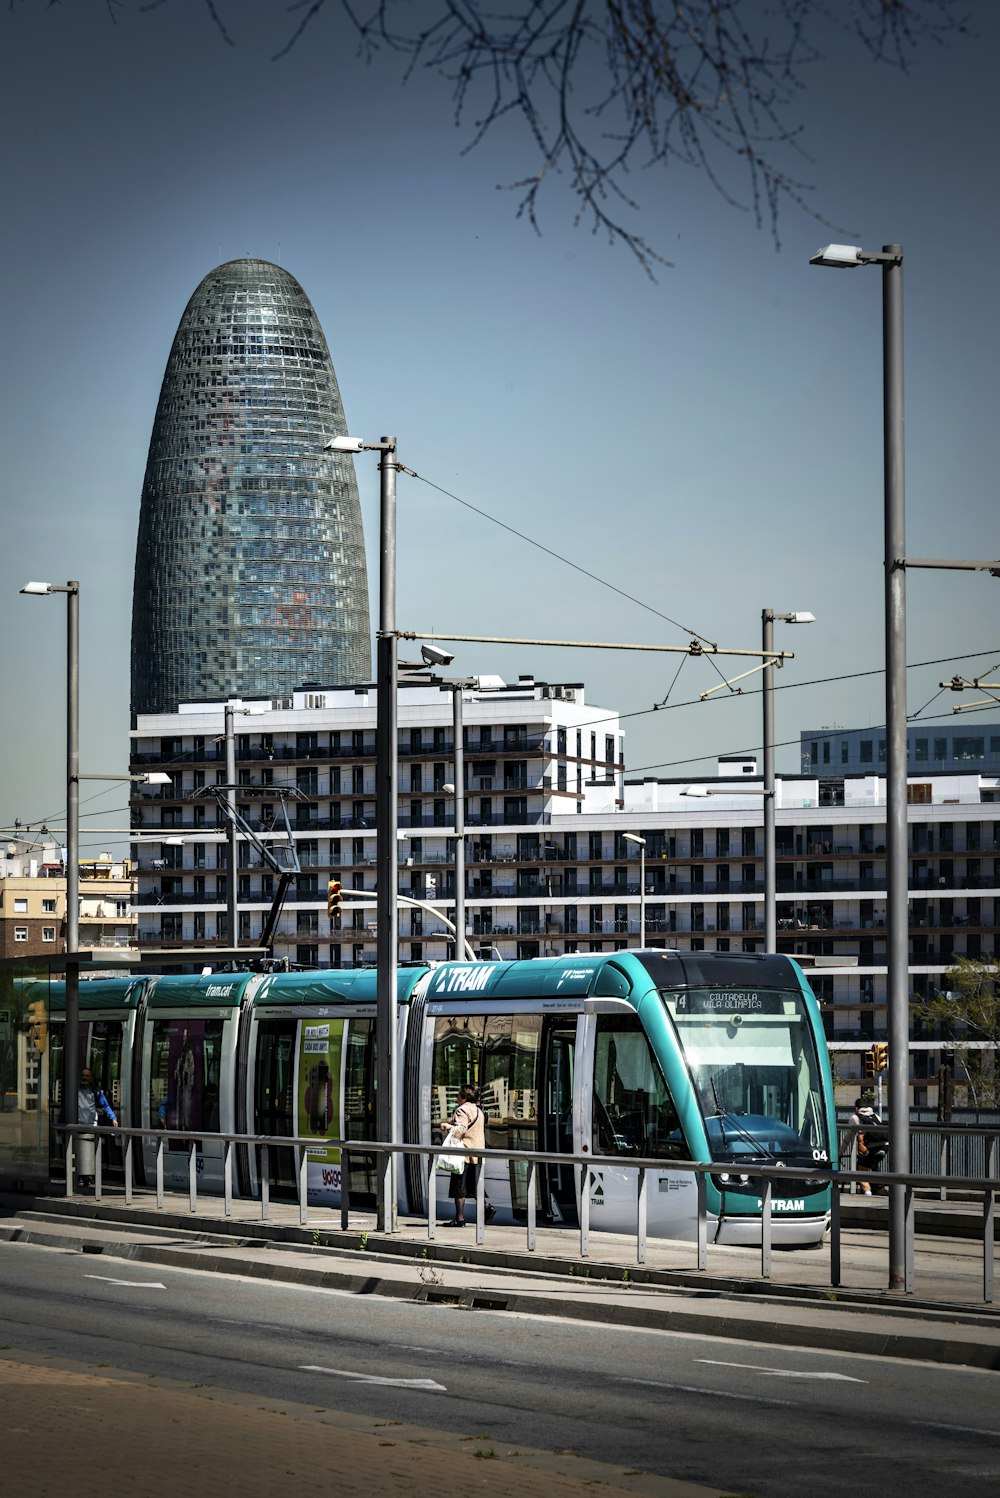 a blue and white train traveling past a tall building